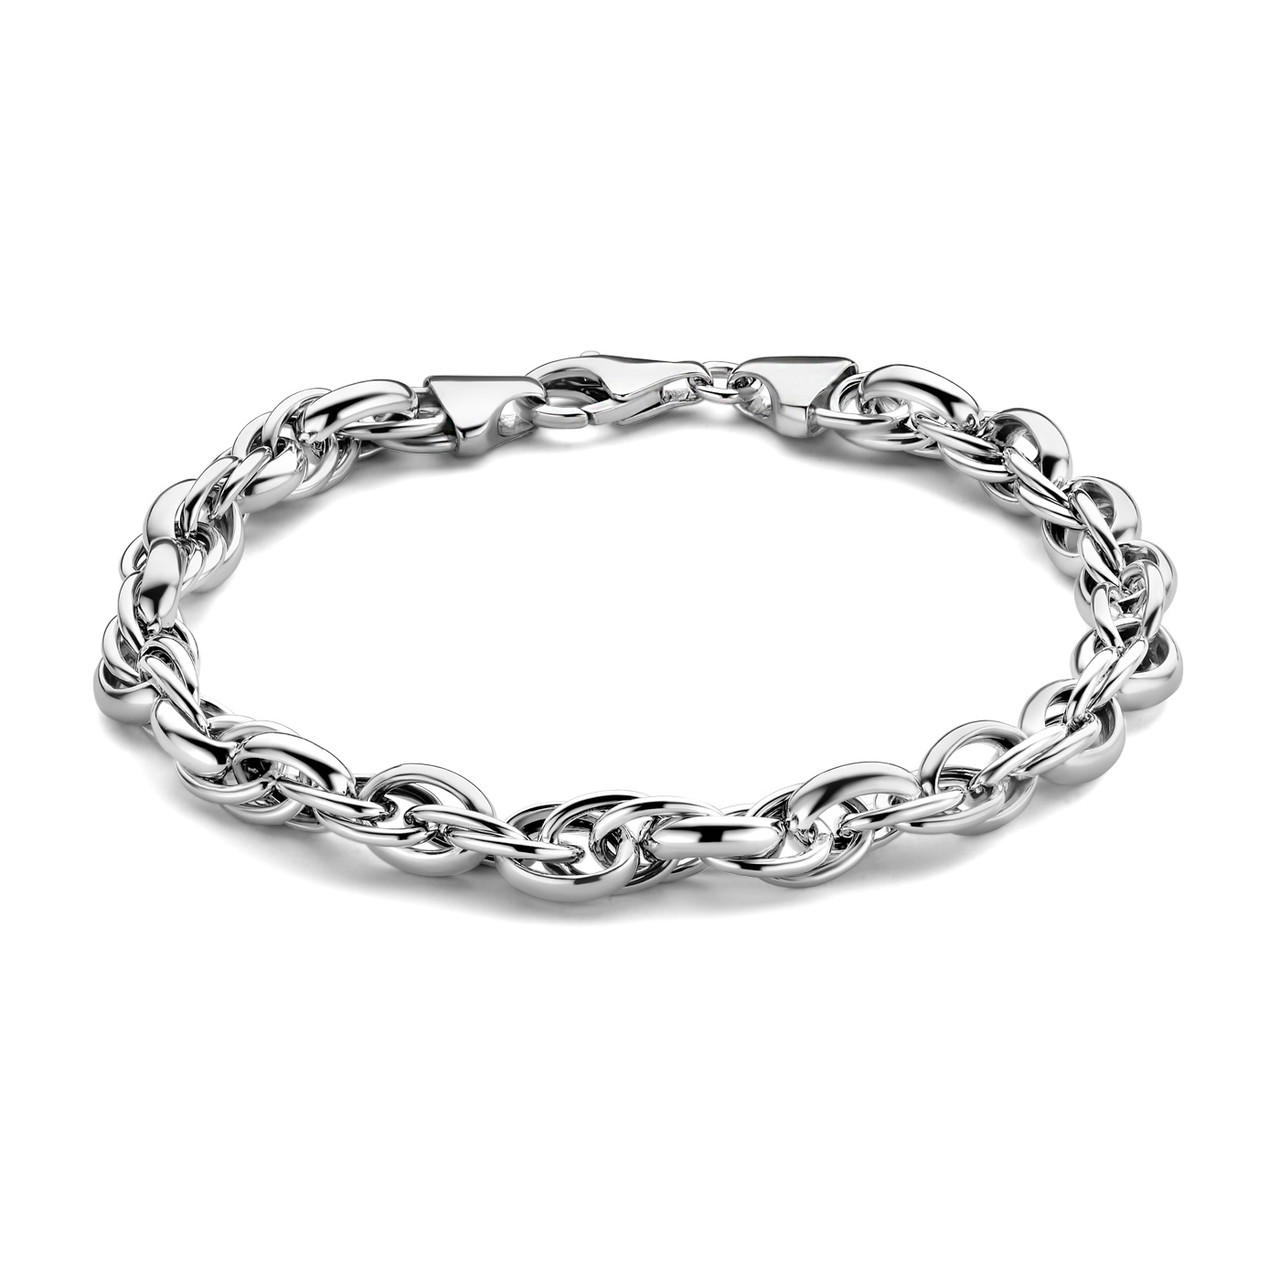 Di 925 PDM32011 Armband Link Sterling - Me Parte Silber